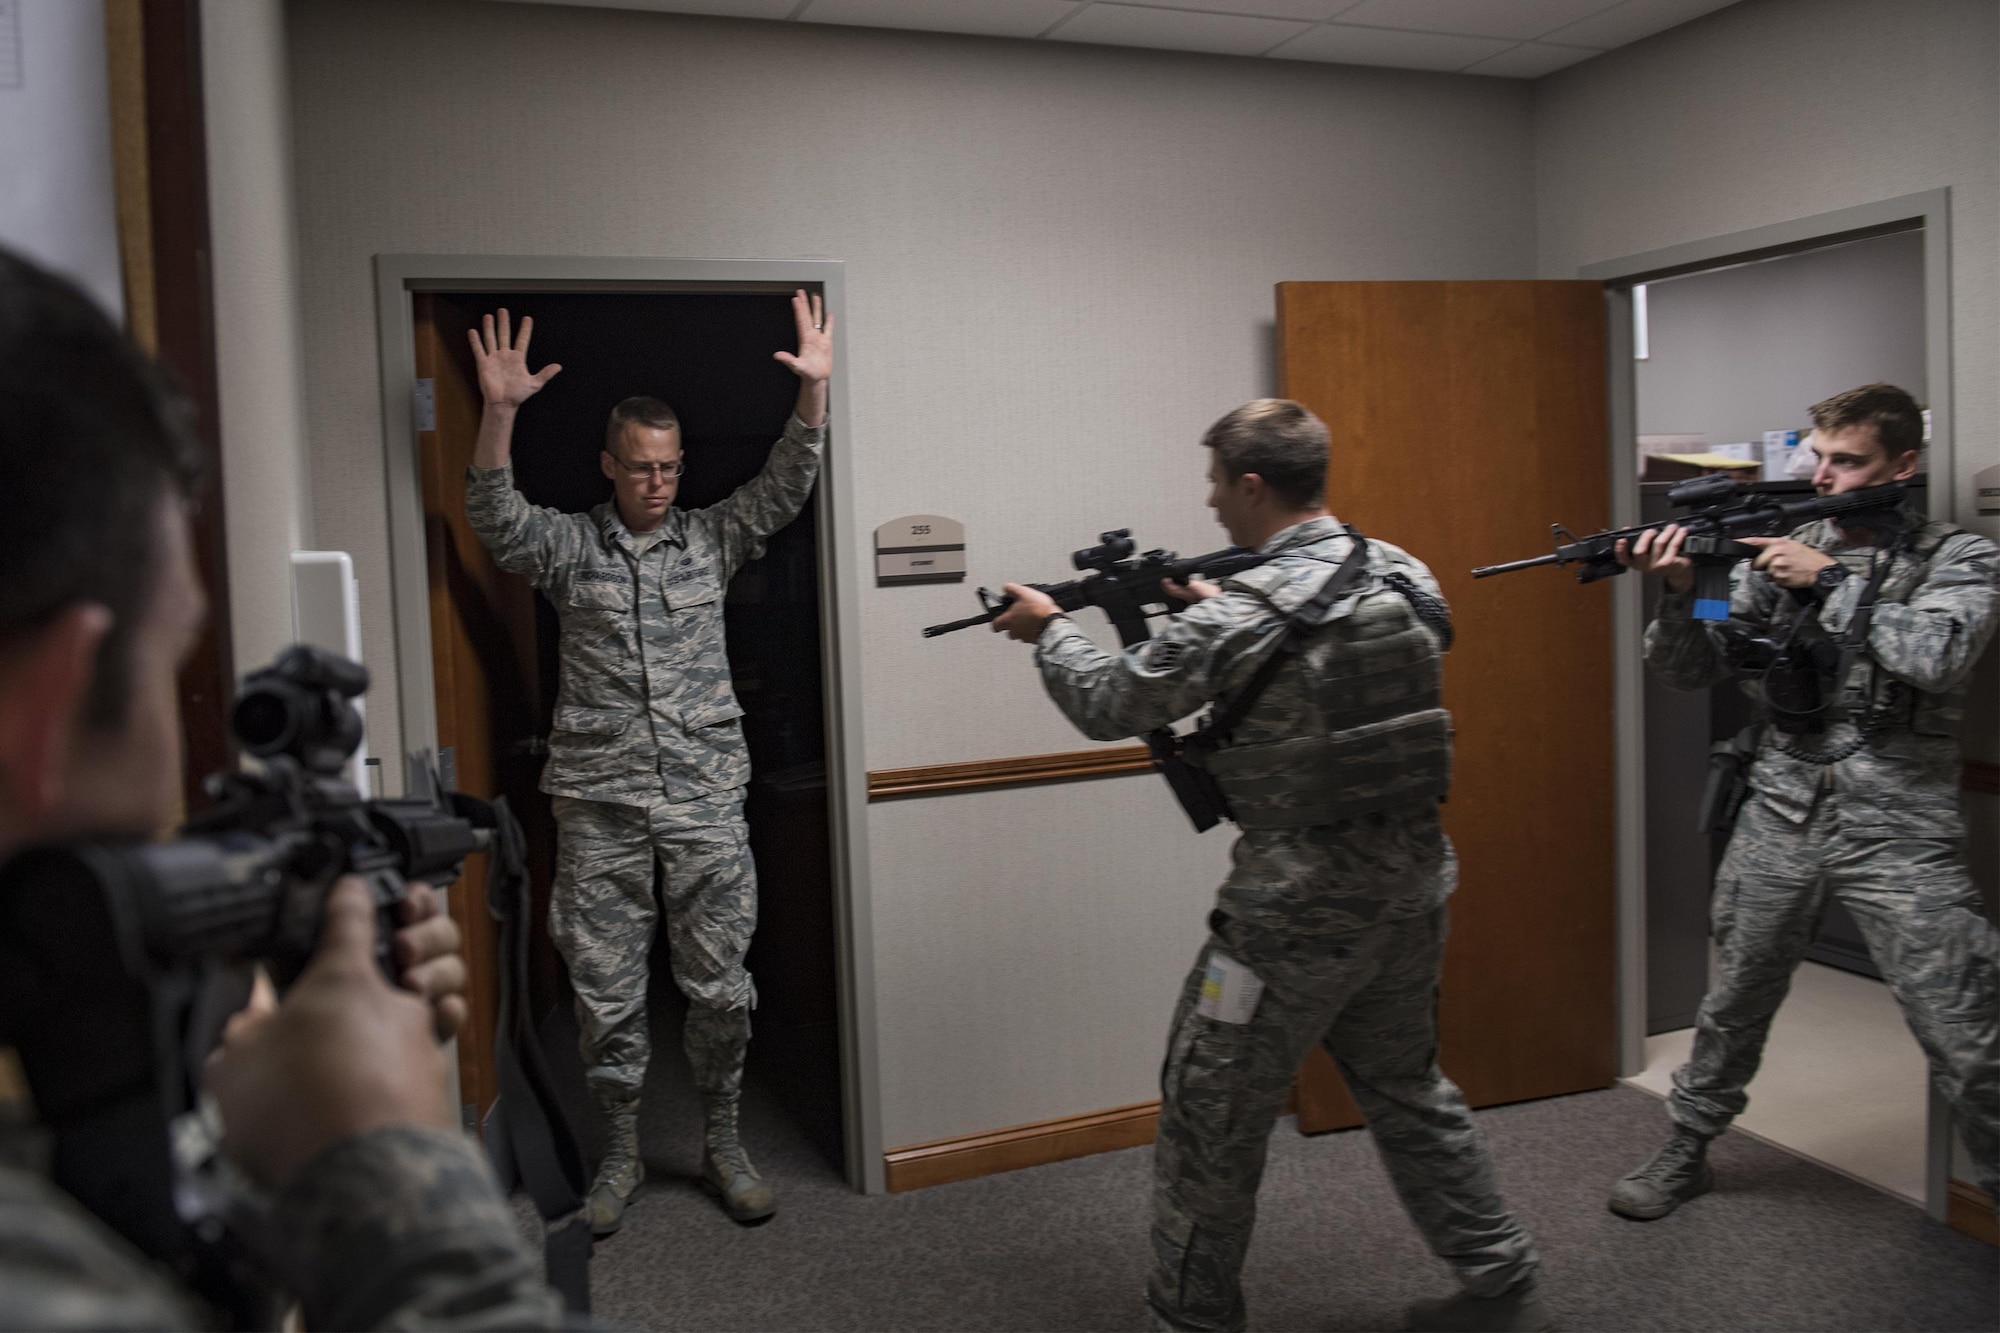 Members of the 23d Security Forces Squadron approach Capt. Bradley Richardson, 23d Wing assistant judge advocate, to ensure he’s not a threat, during an active shooter exercise, Dec. 8, 2016, at Moody Air Force Base, Ga. Everyone in the building followed the directions ‘run, hide, fight,’ a technique taught for active shooter scenarios. (U.S. Air Force photo by Airman 1st Class Daniel Snider)